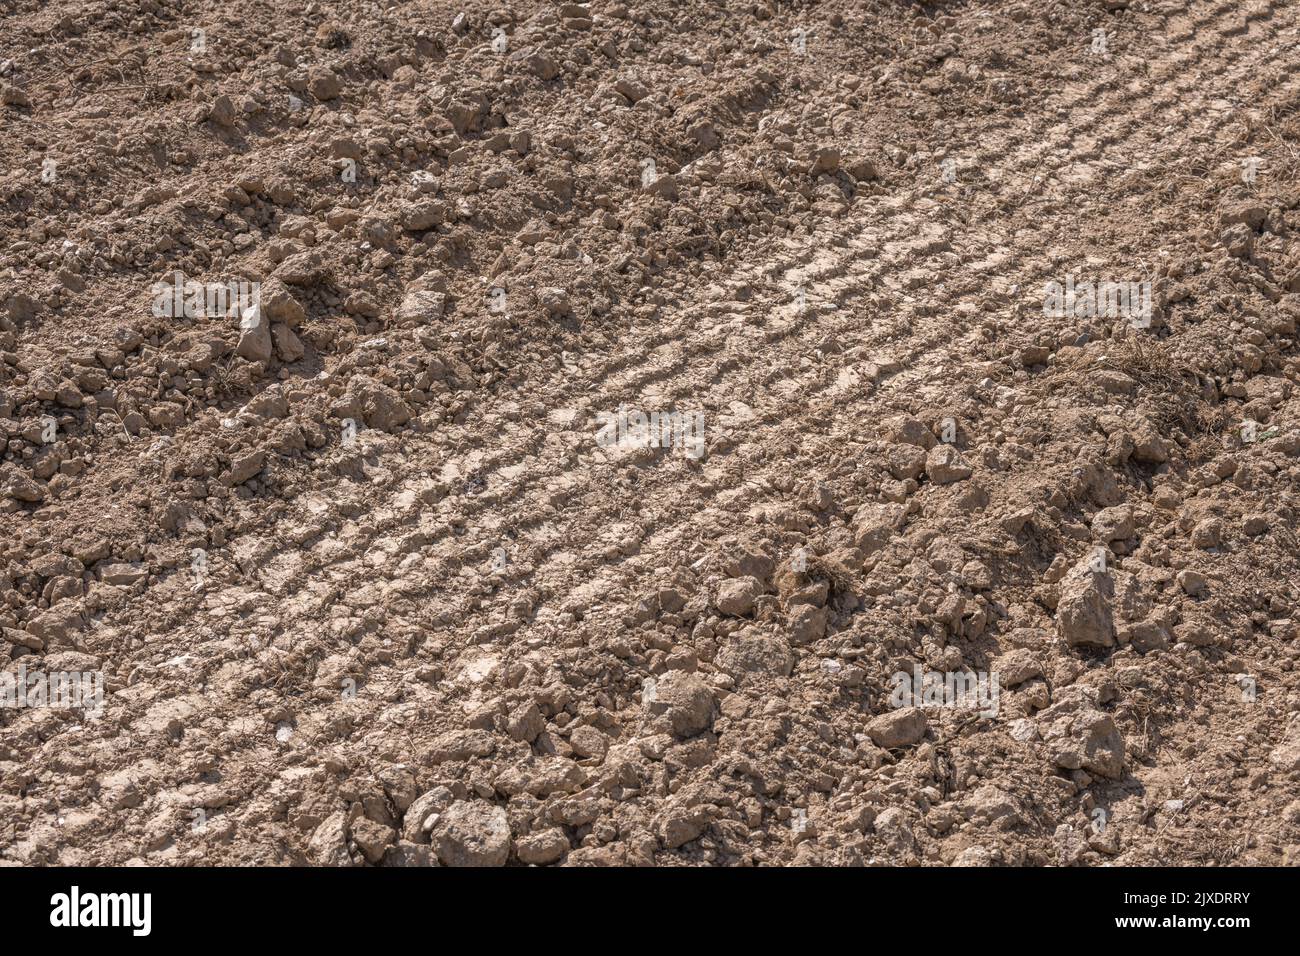 Farm tractor tyre tracks in dry parched soil in field prepared for planting new crop. For dried earth or farmland, UK agriculture, leave an impression Stock Photo